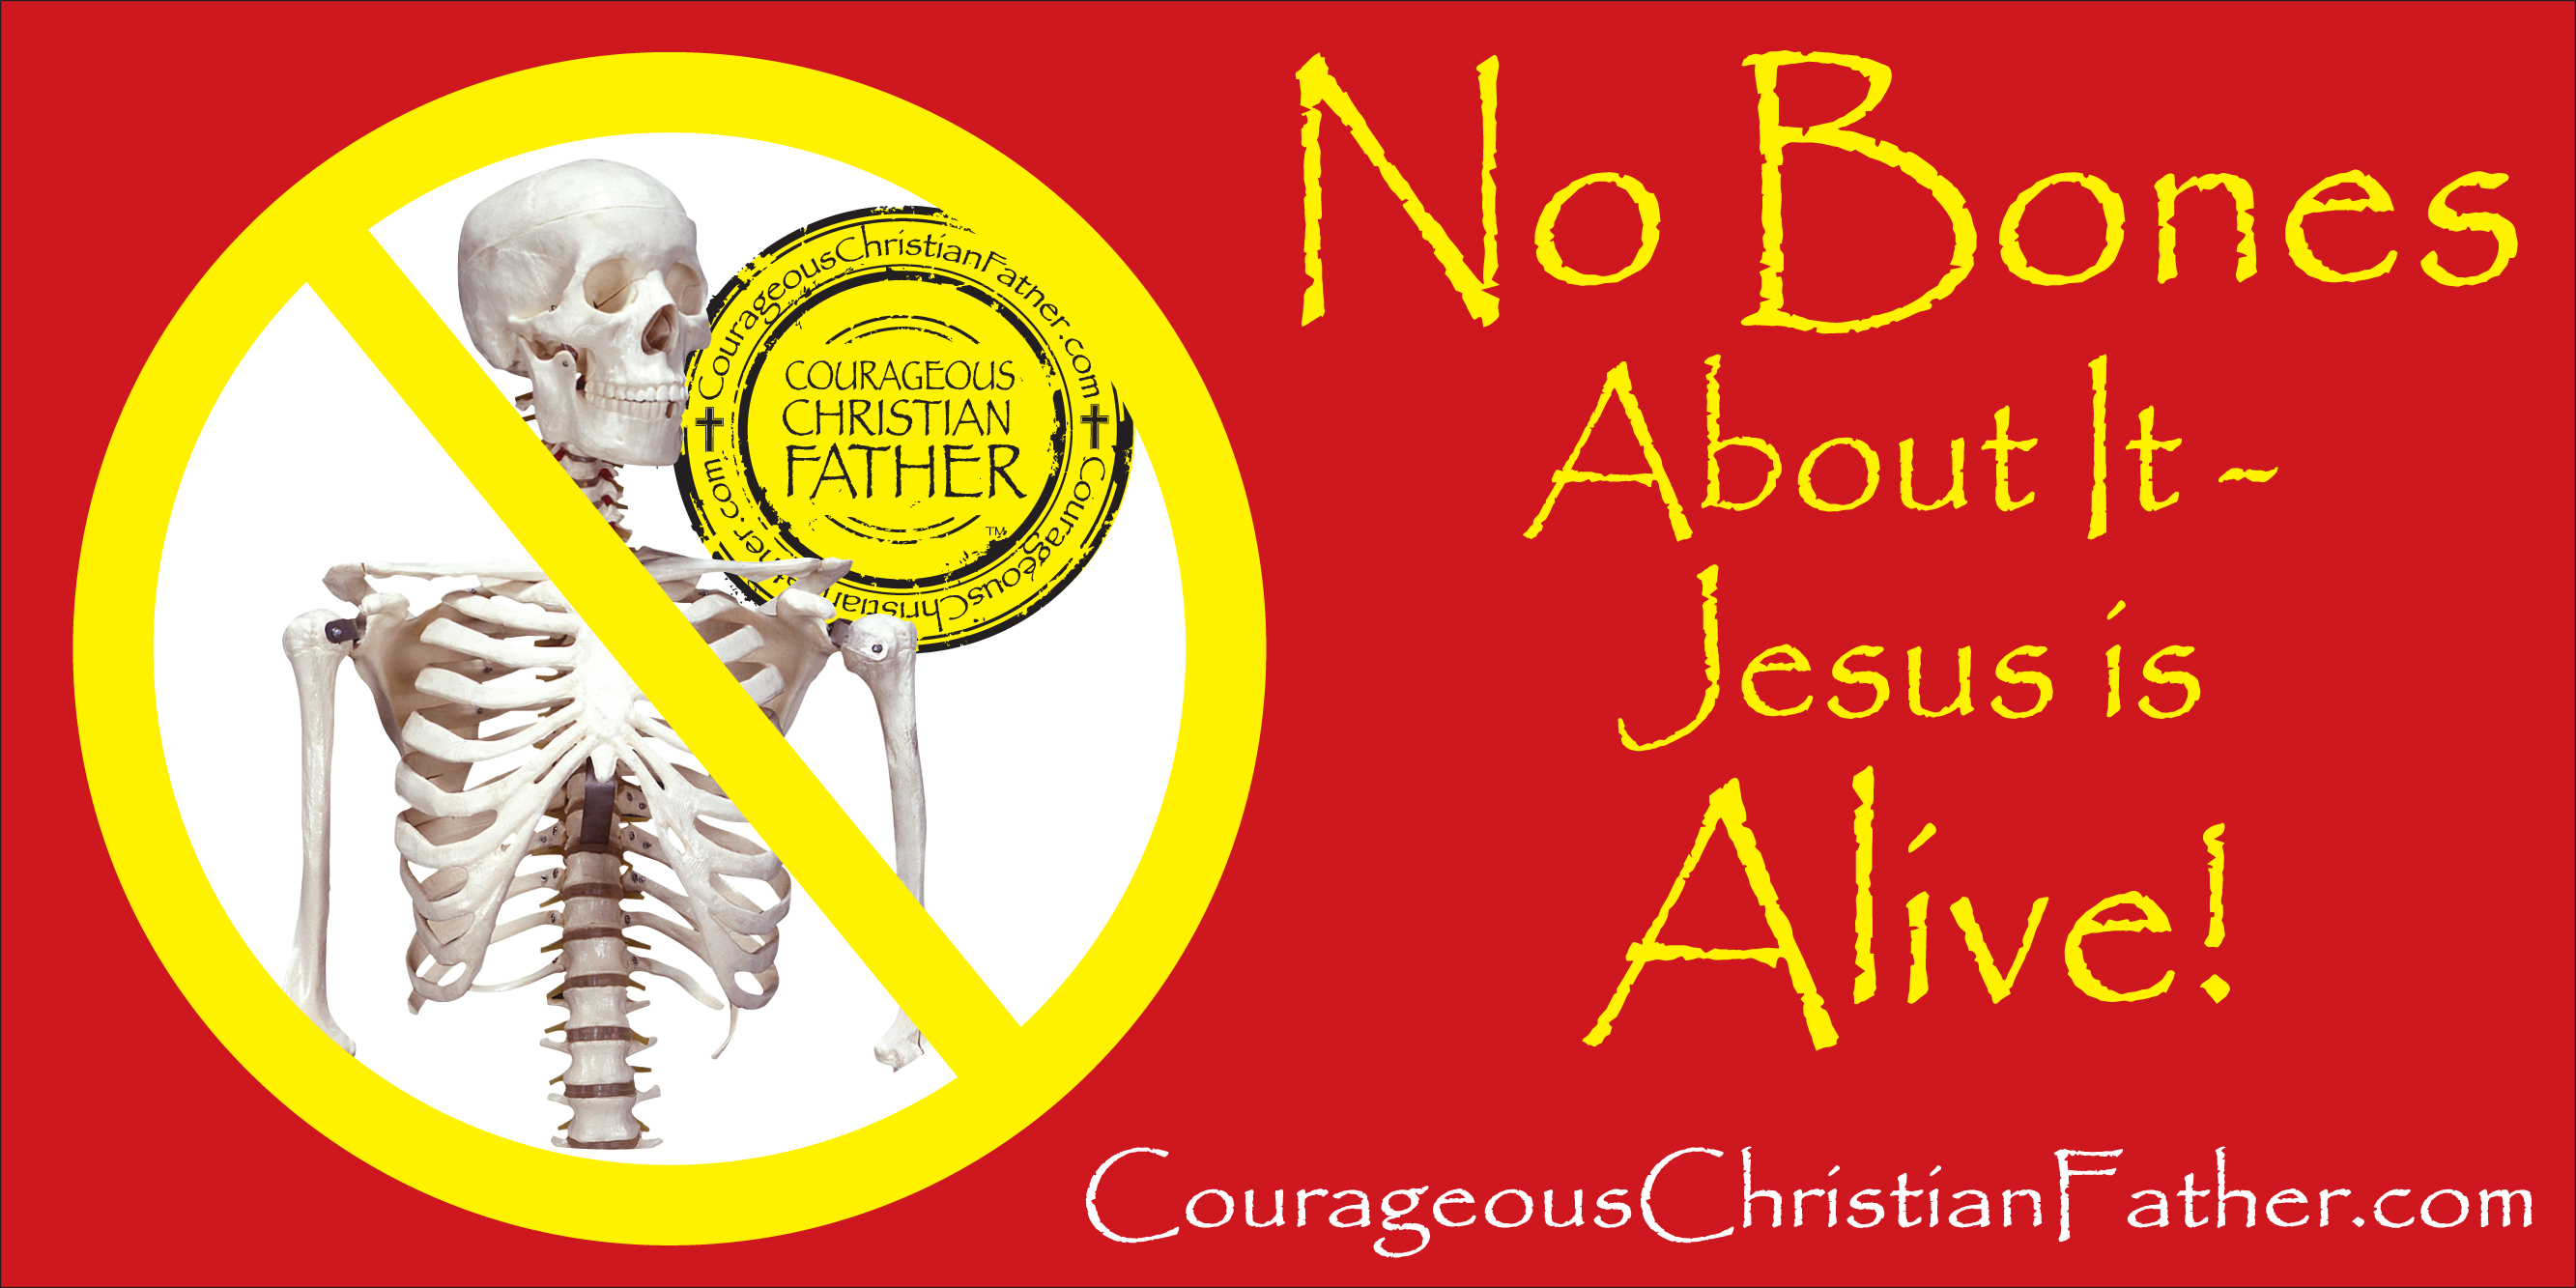 The phrase ‘No Bones About It’  is often used as well to state a fact with no doubt meaning Christ arose from the dead His bones were never found! Jesus Christ is surely alive!